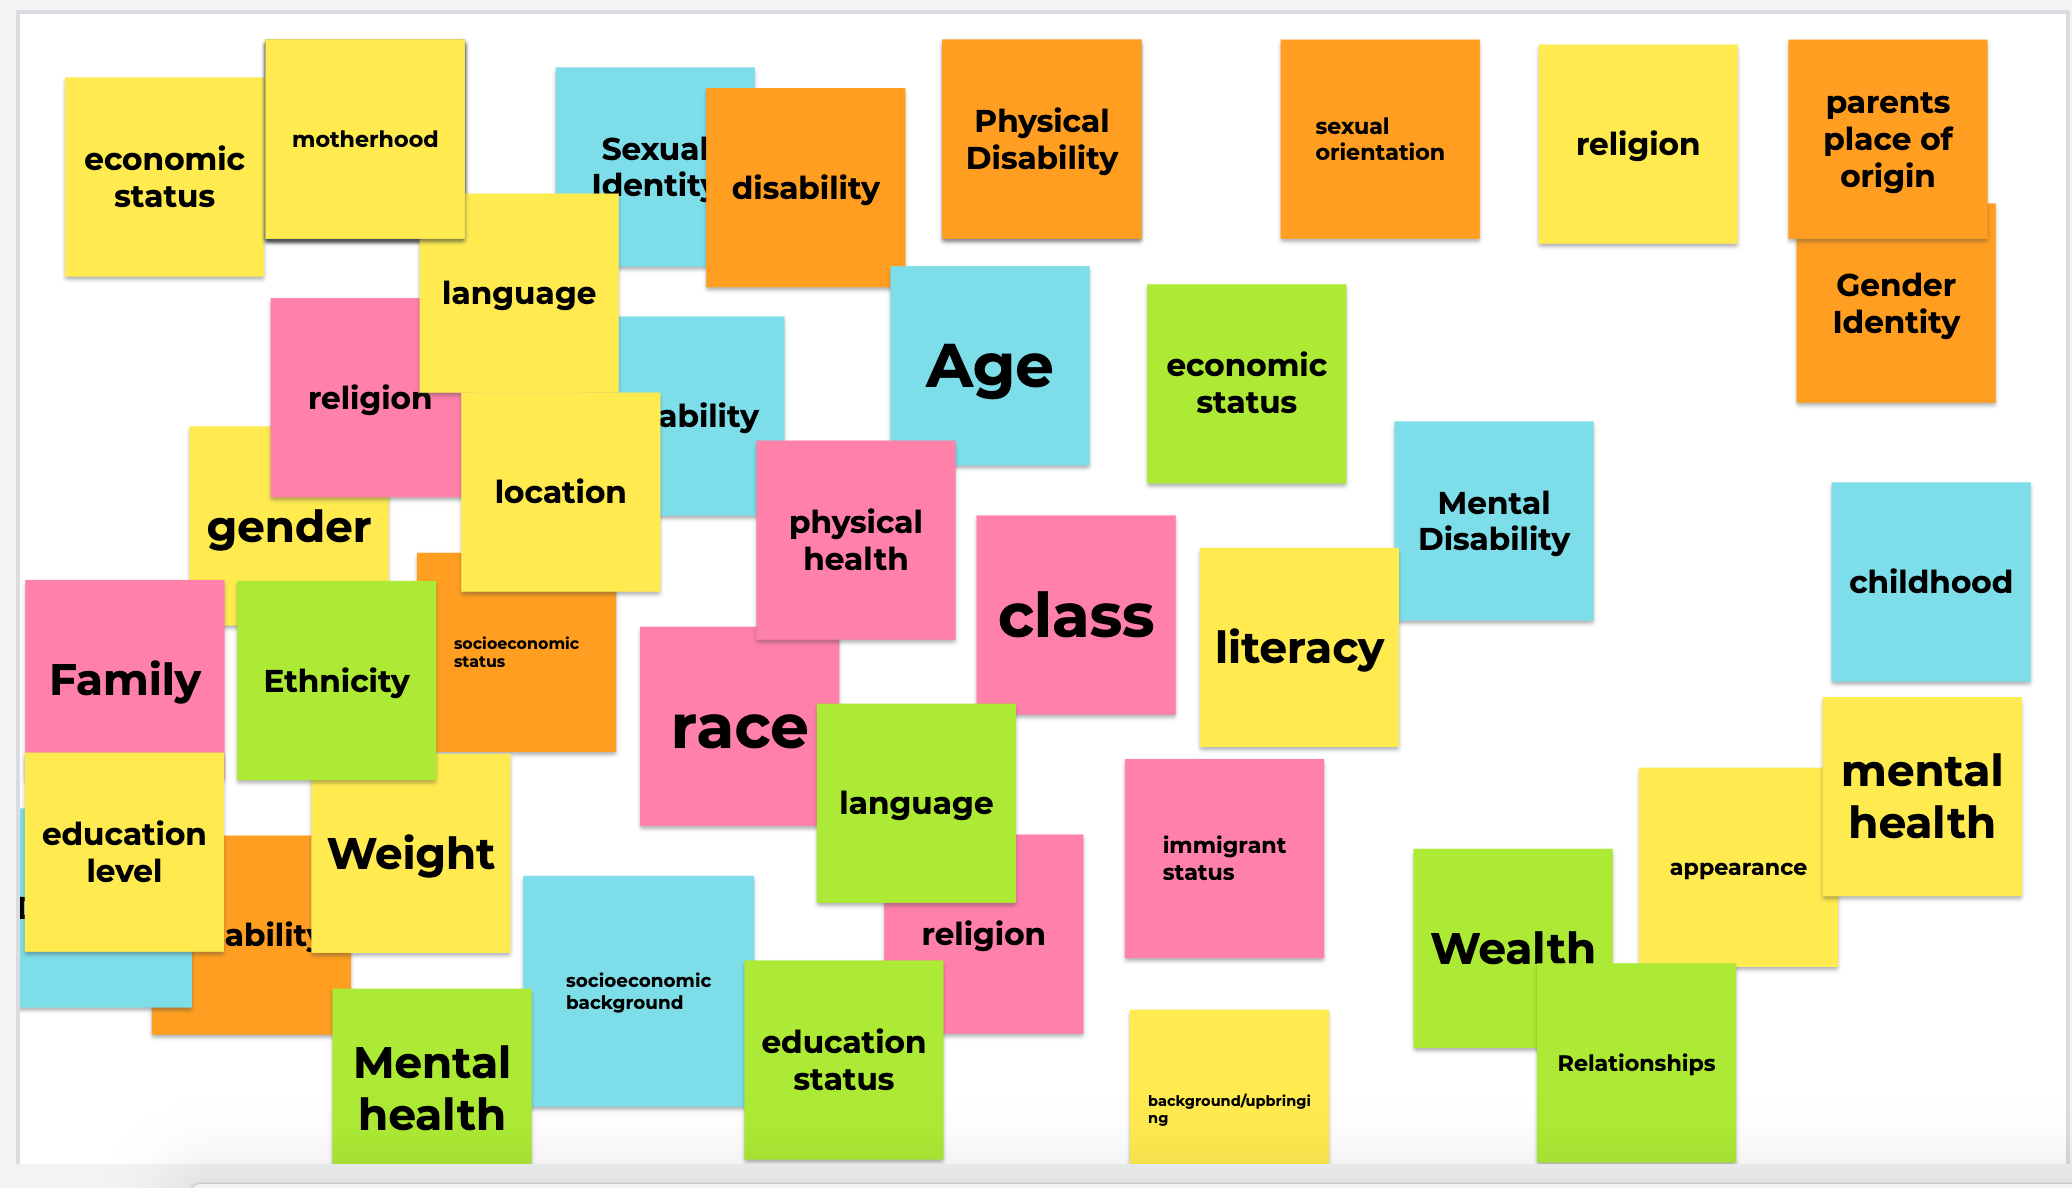 Fig. 3. Screenshot of Jamboard on intersectionality, containing over thirty orange, yellow, blue, pink, and green sticky notes that list various vectors of identity or oppression, such as “religion,” “race,” “class, “weight,” “education status,” and “sexual identity.”